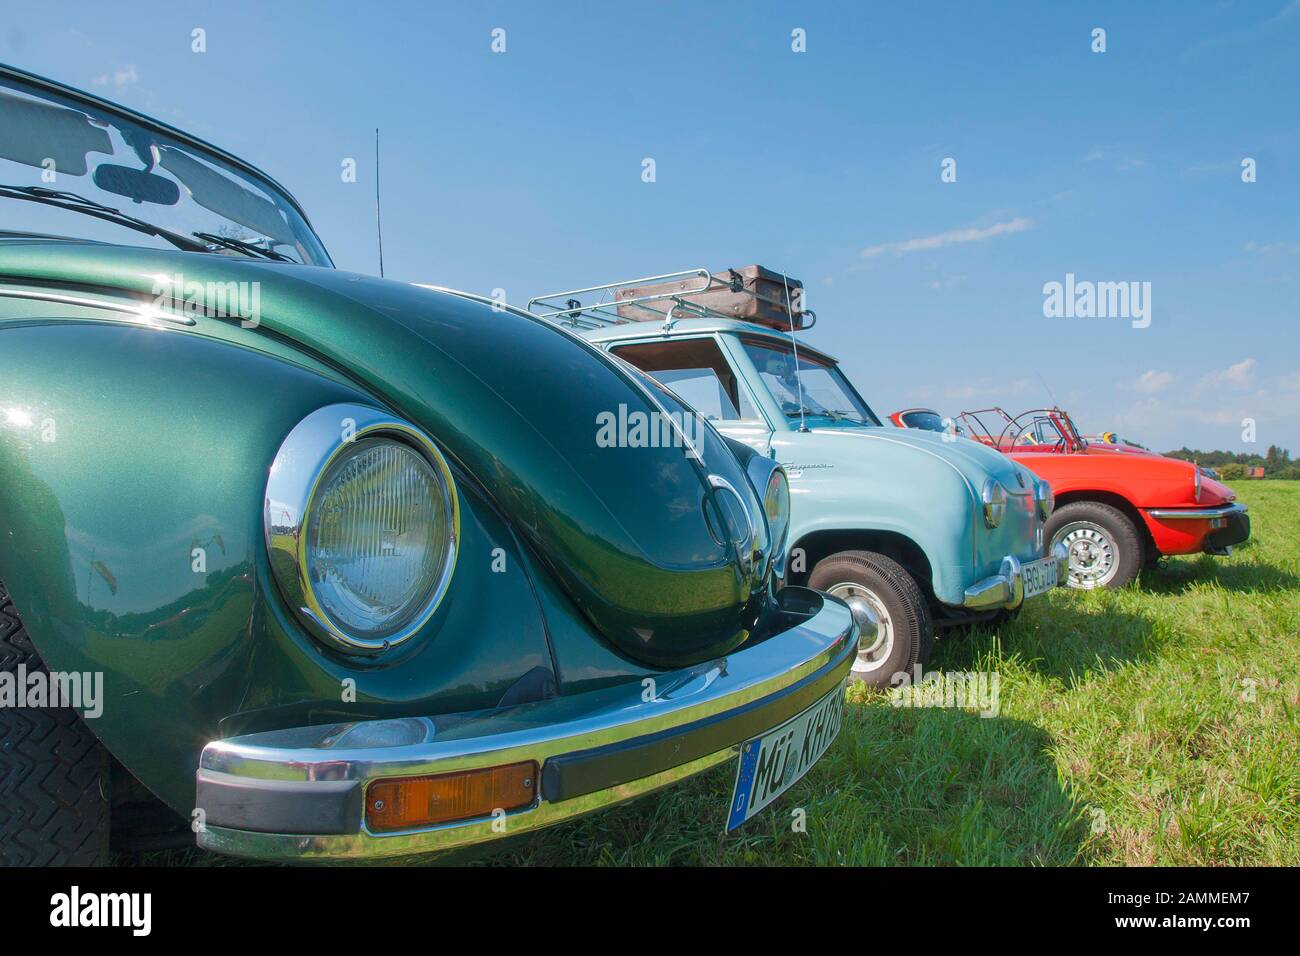 Oldtimer Meeting High Resolution Stock Photography and Images - Alamy